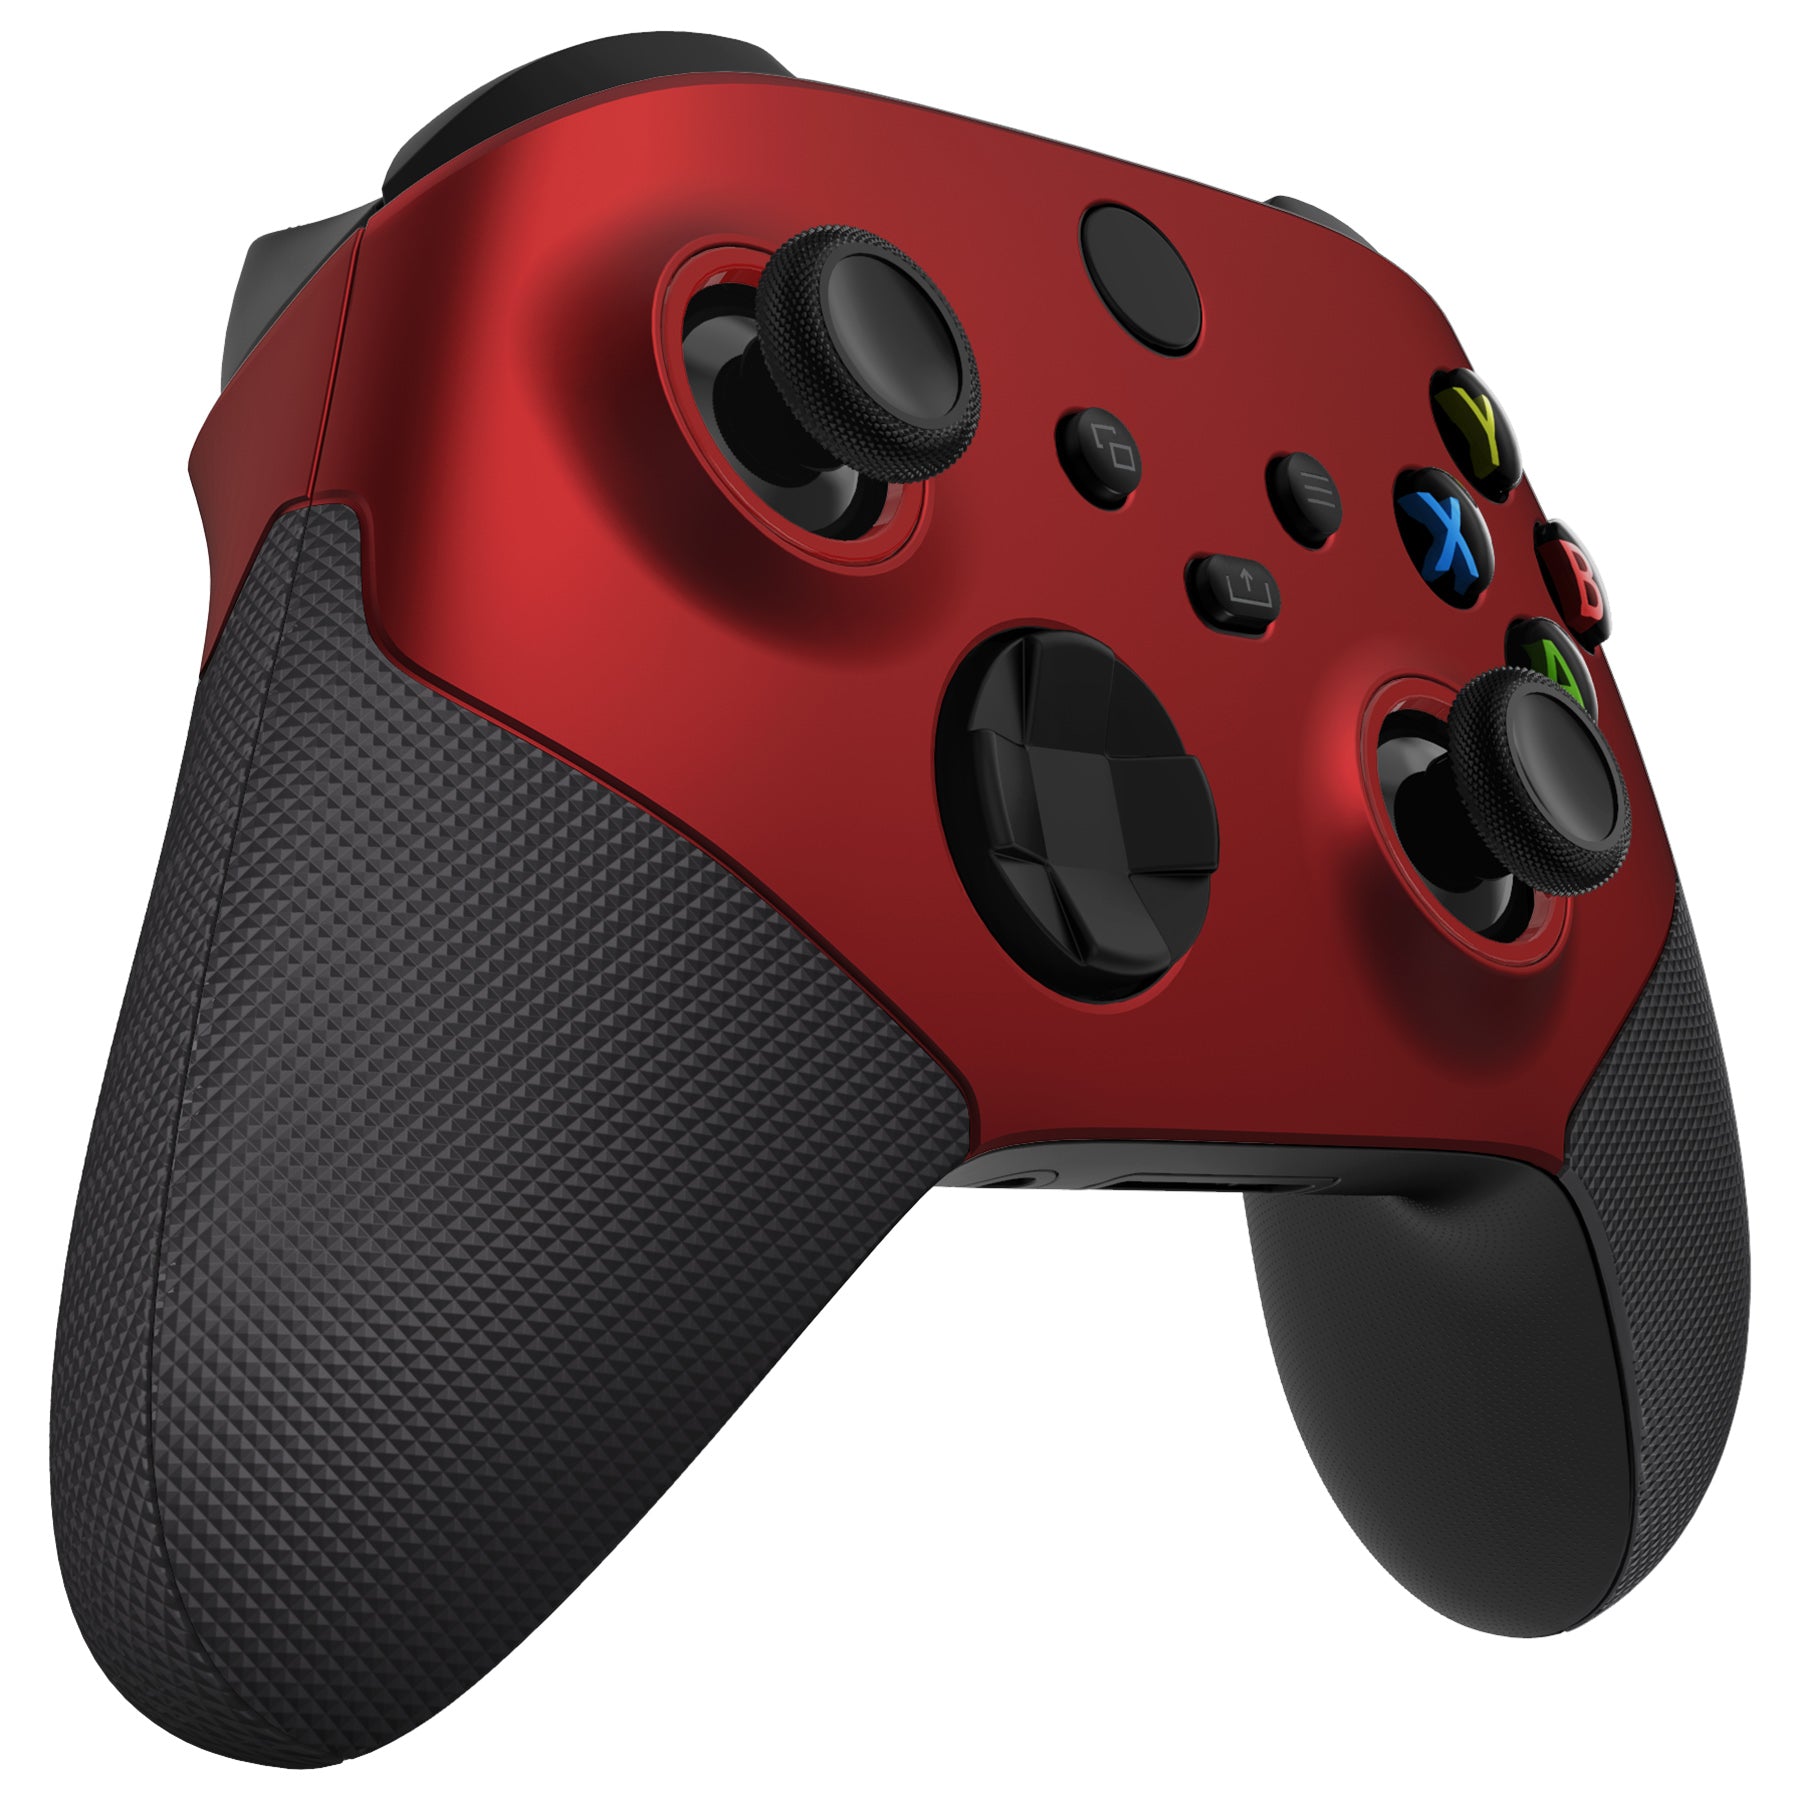 eXtremeRate ASR Version Performance Rubberized Side Rails Front Housing Shells with Accent Rings for Xbox Series X & S Controller - Rubberized Scarlet Red & Black eXtremeRate